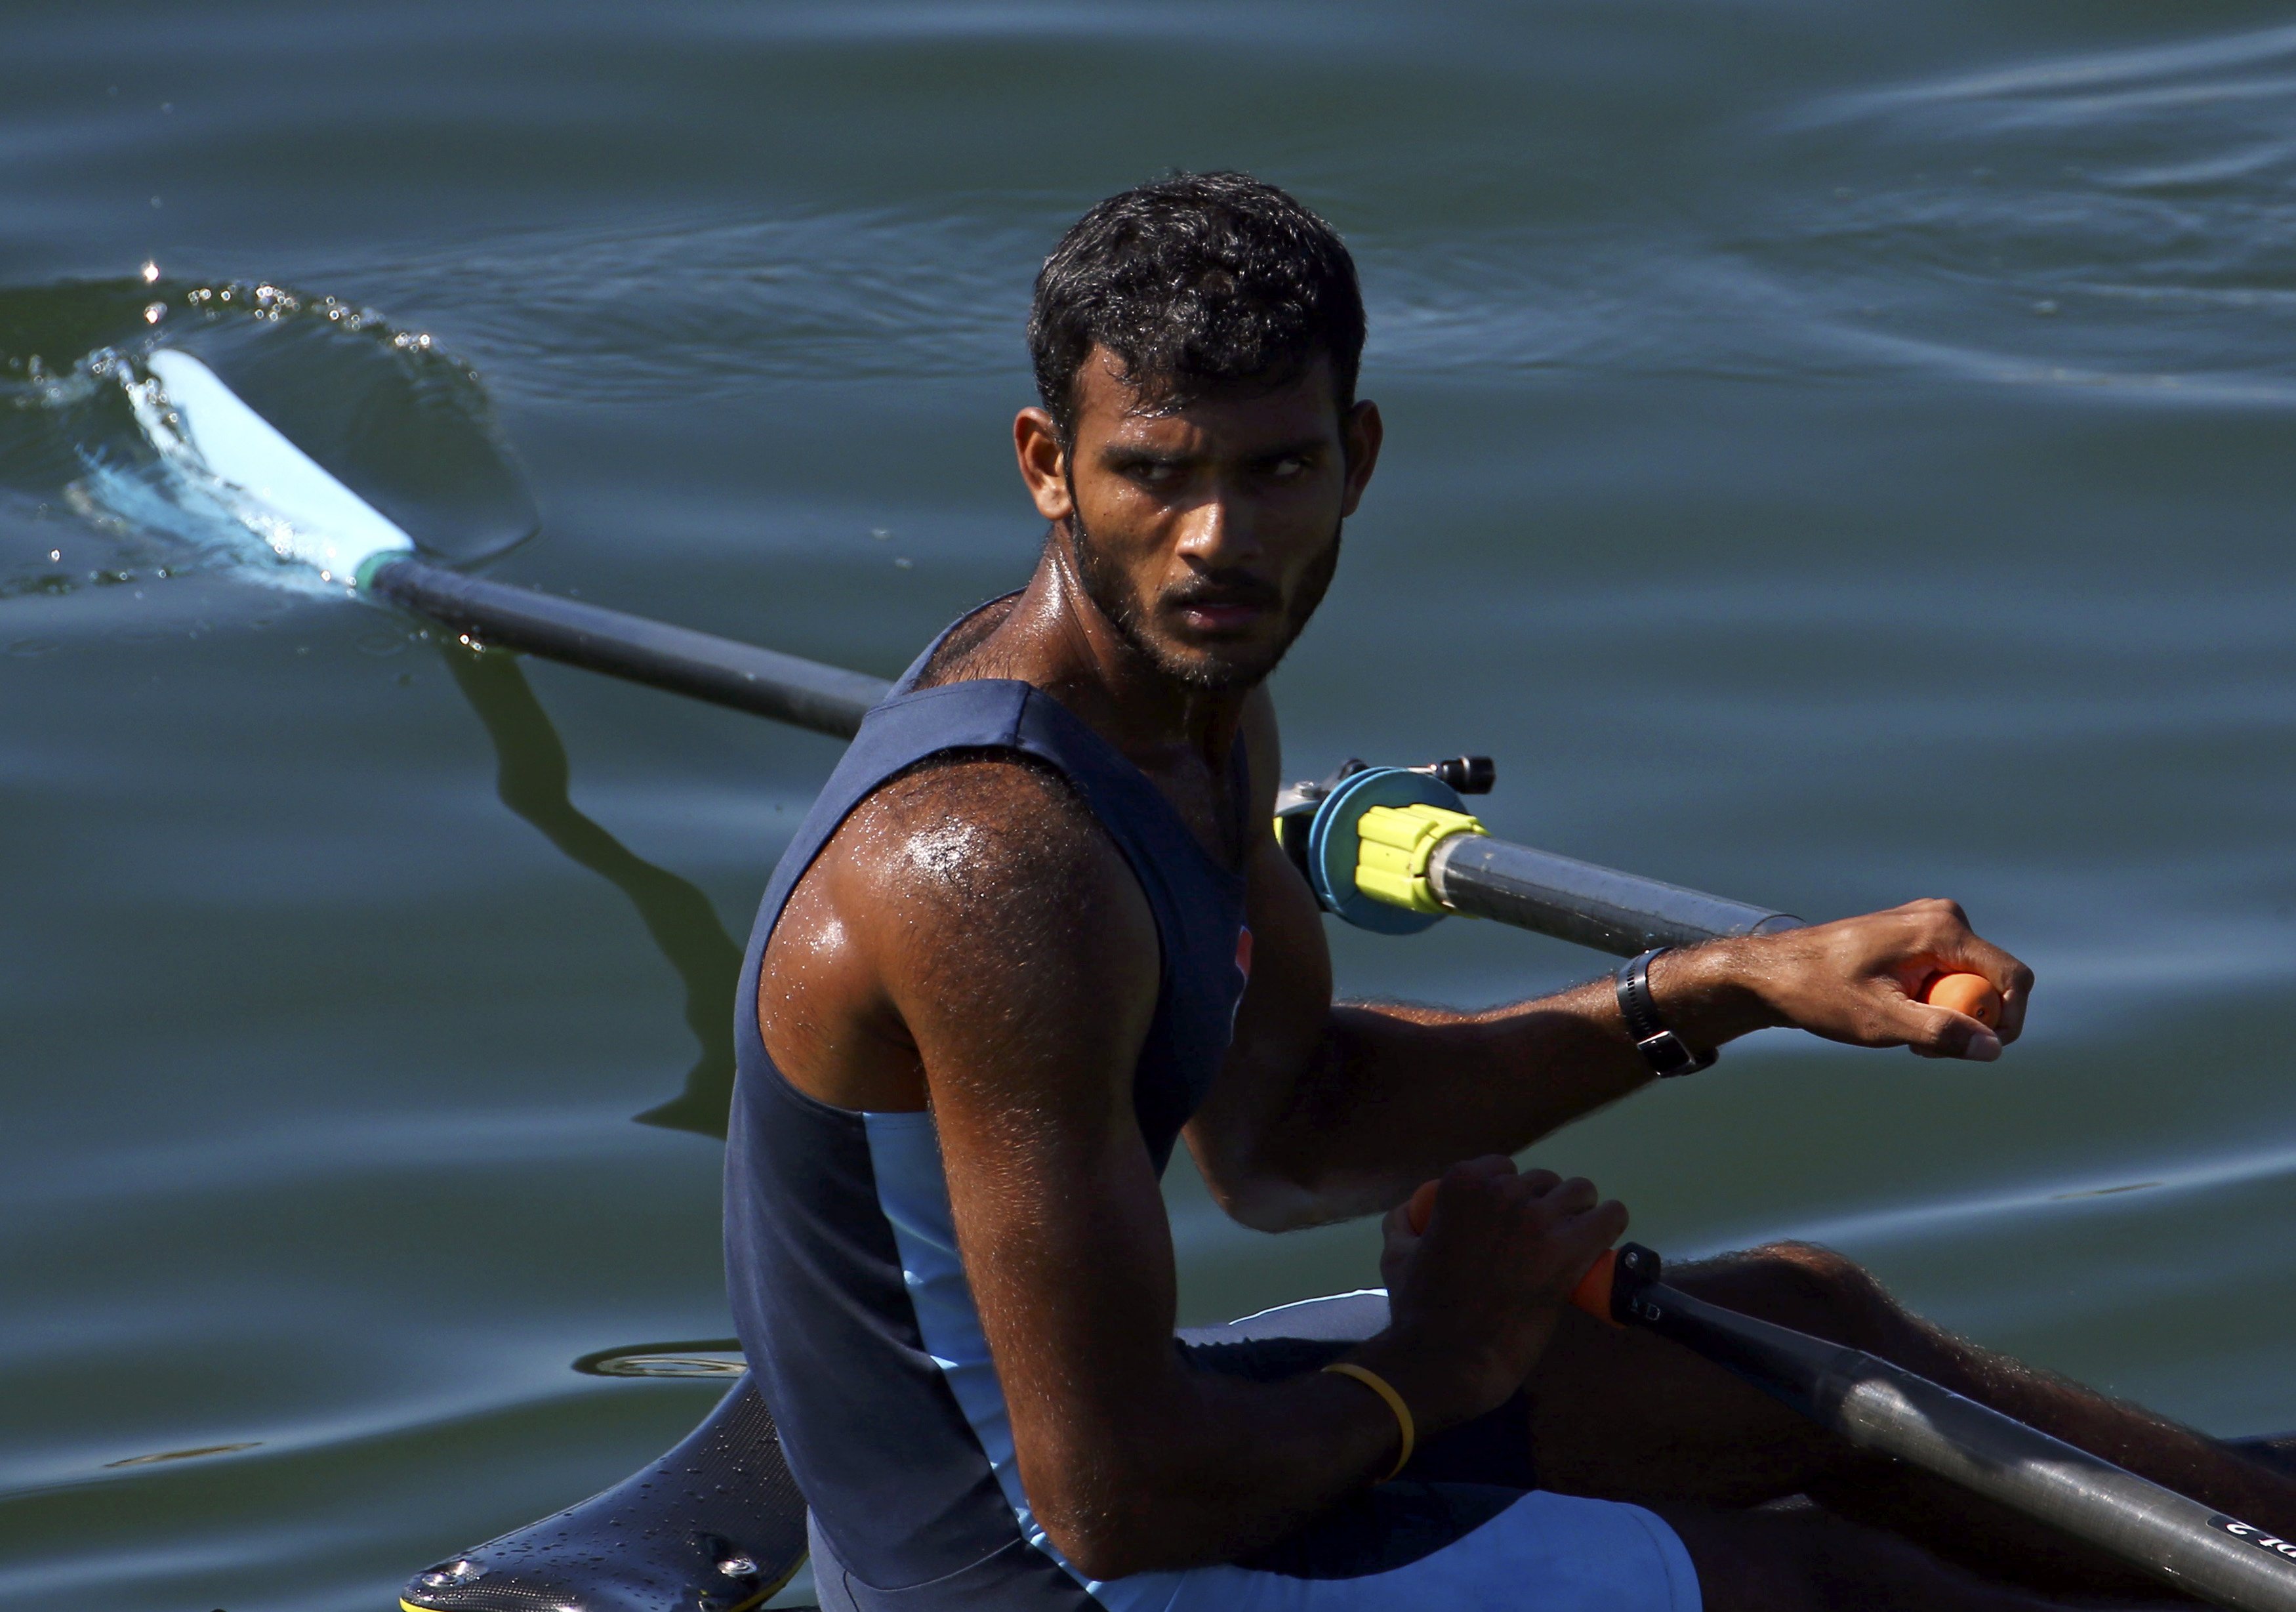 2021 Tokyo Olympics | It's painful to watch the way I am being treated, states Dattu Bhokanal